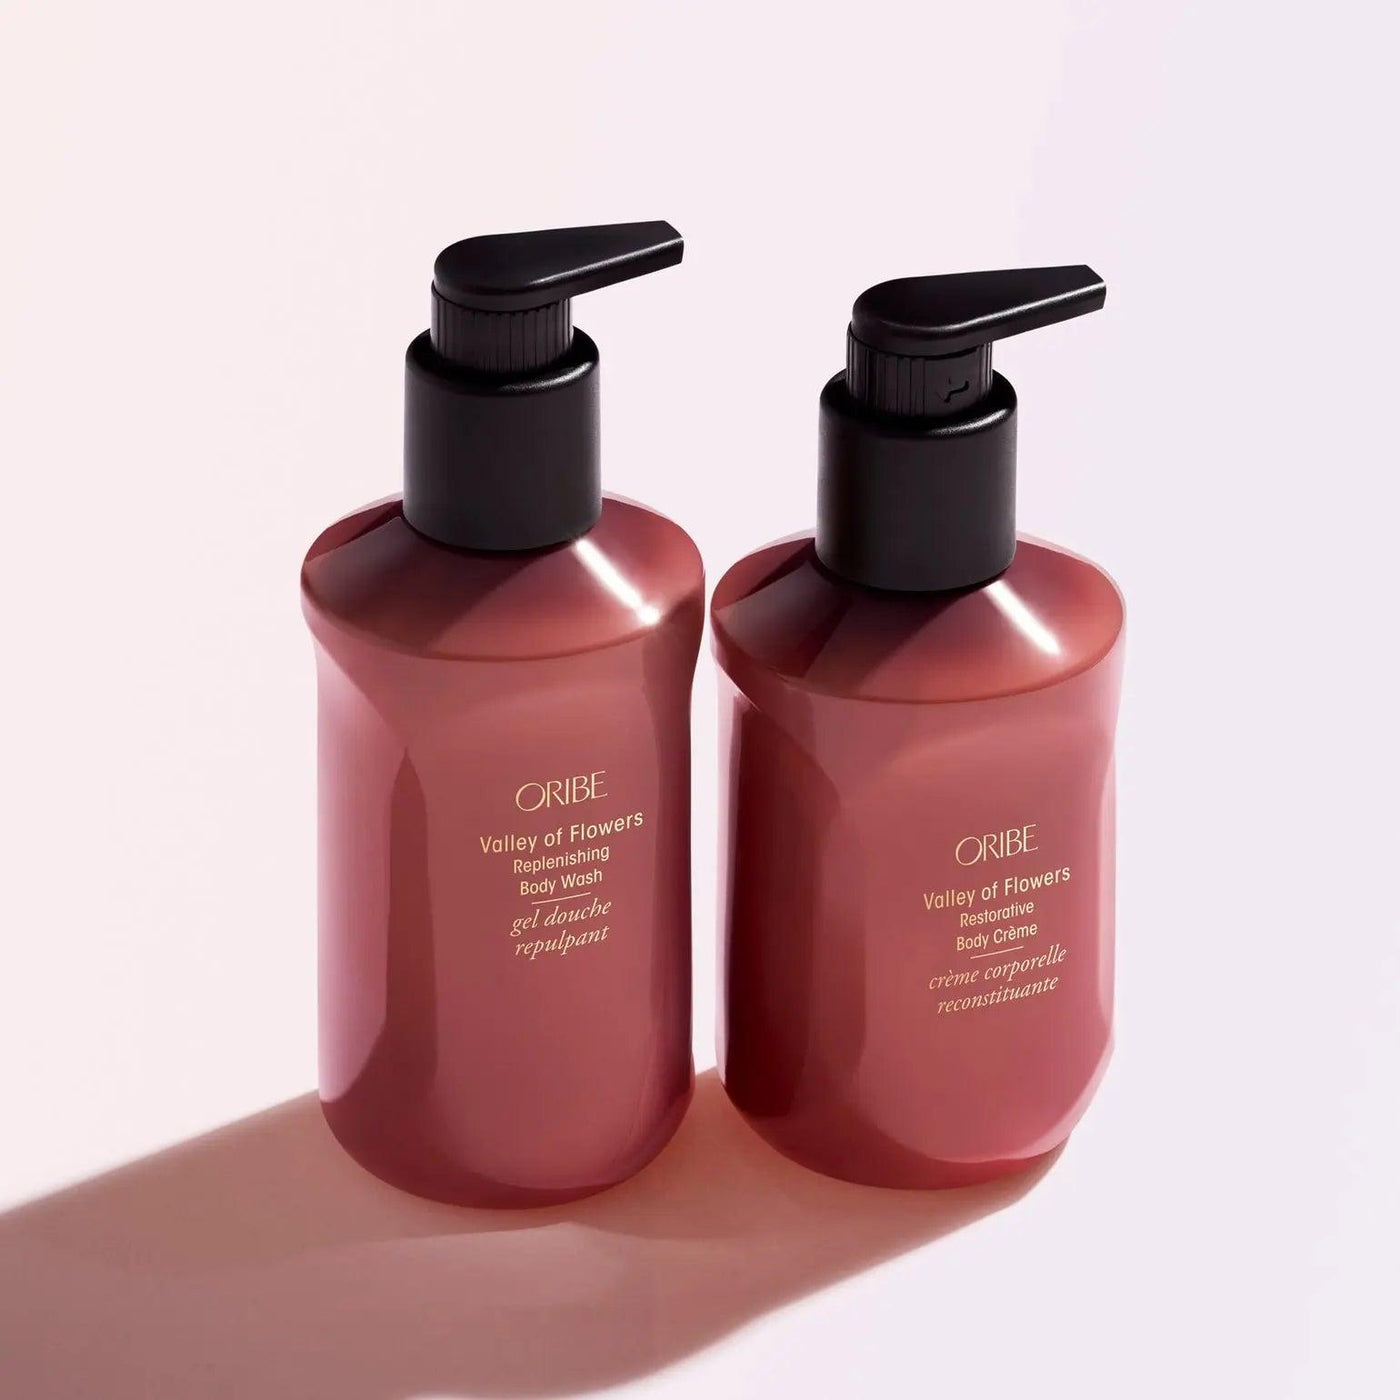 Valley of Flowers Replenishing Body Wash Oribe Boutique Deauville